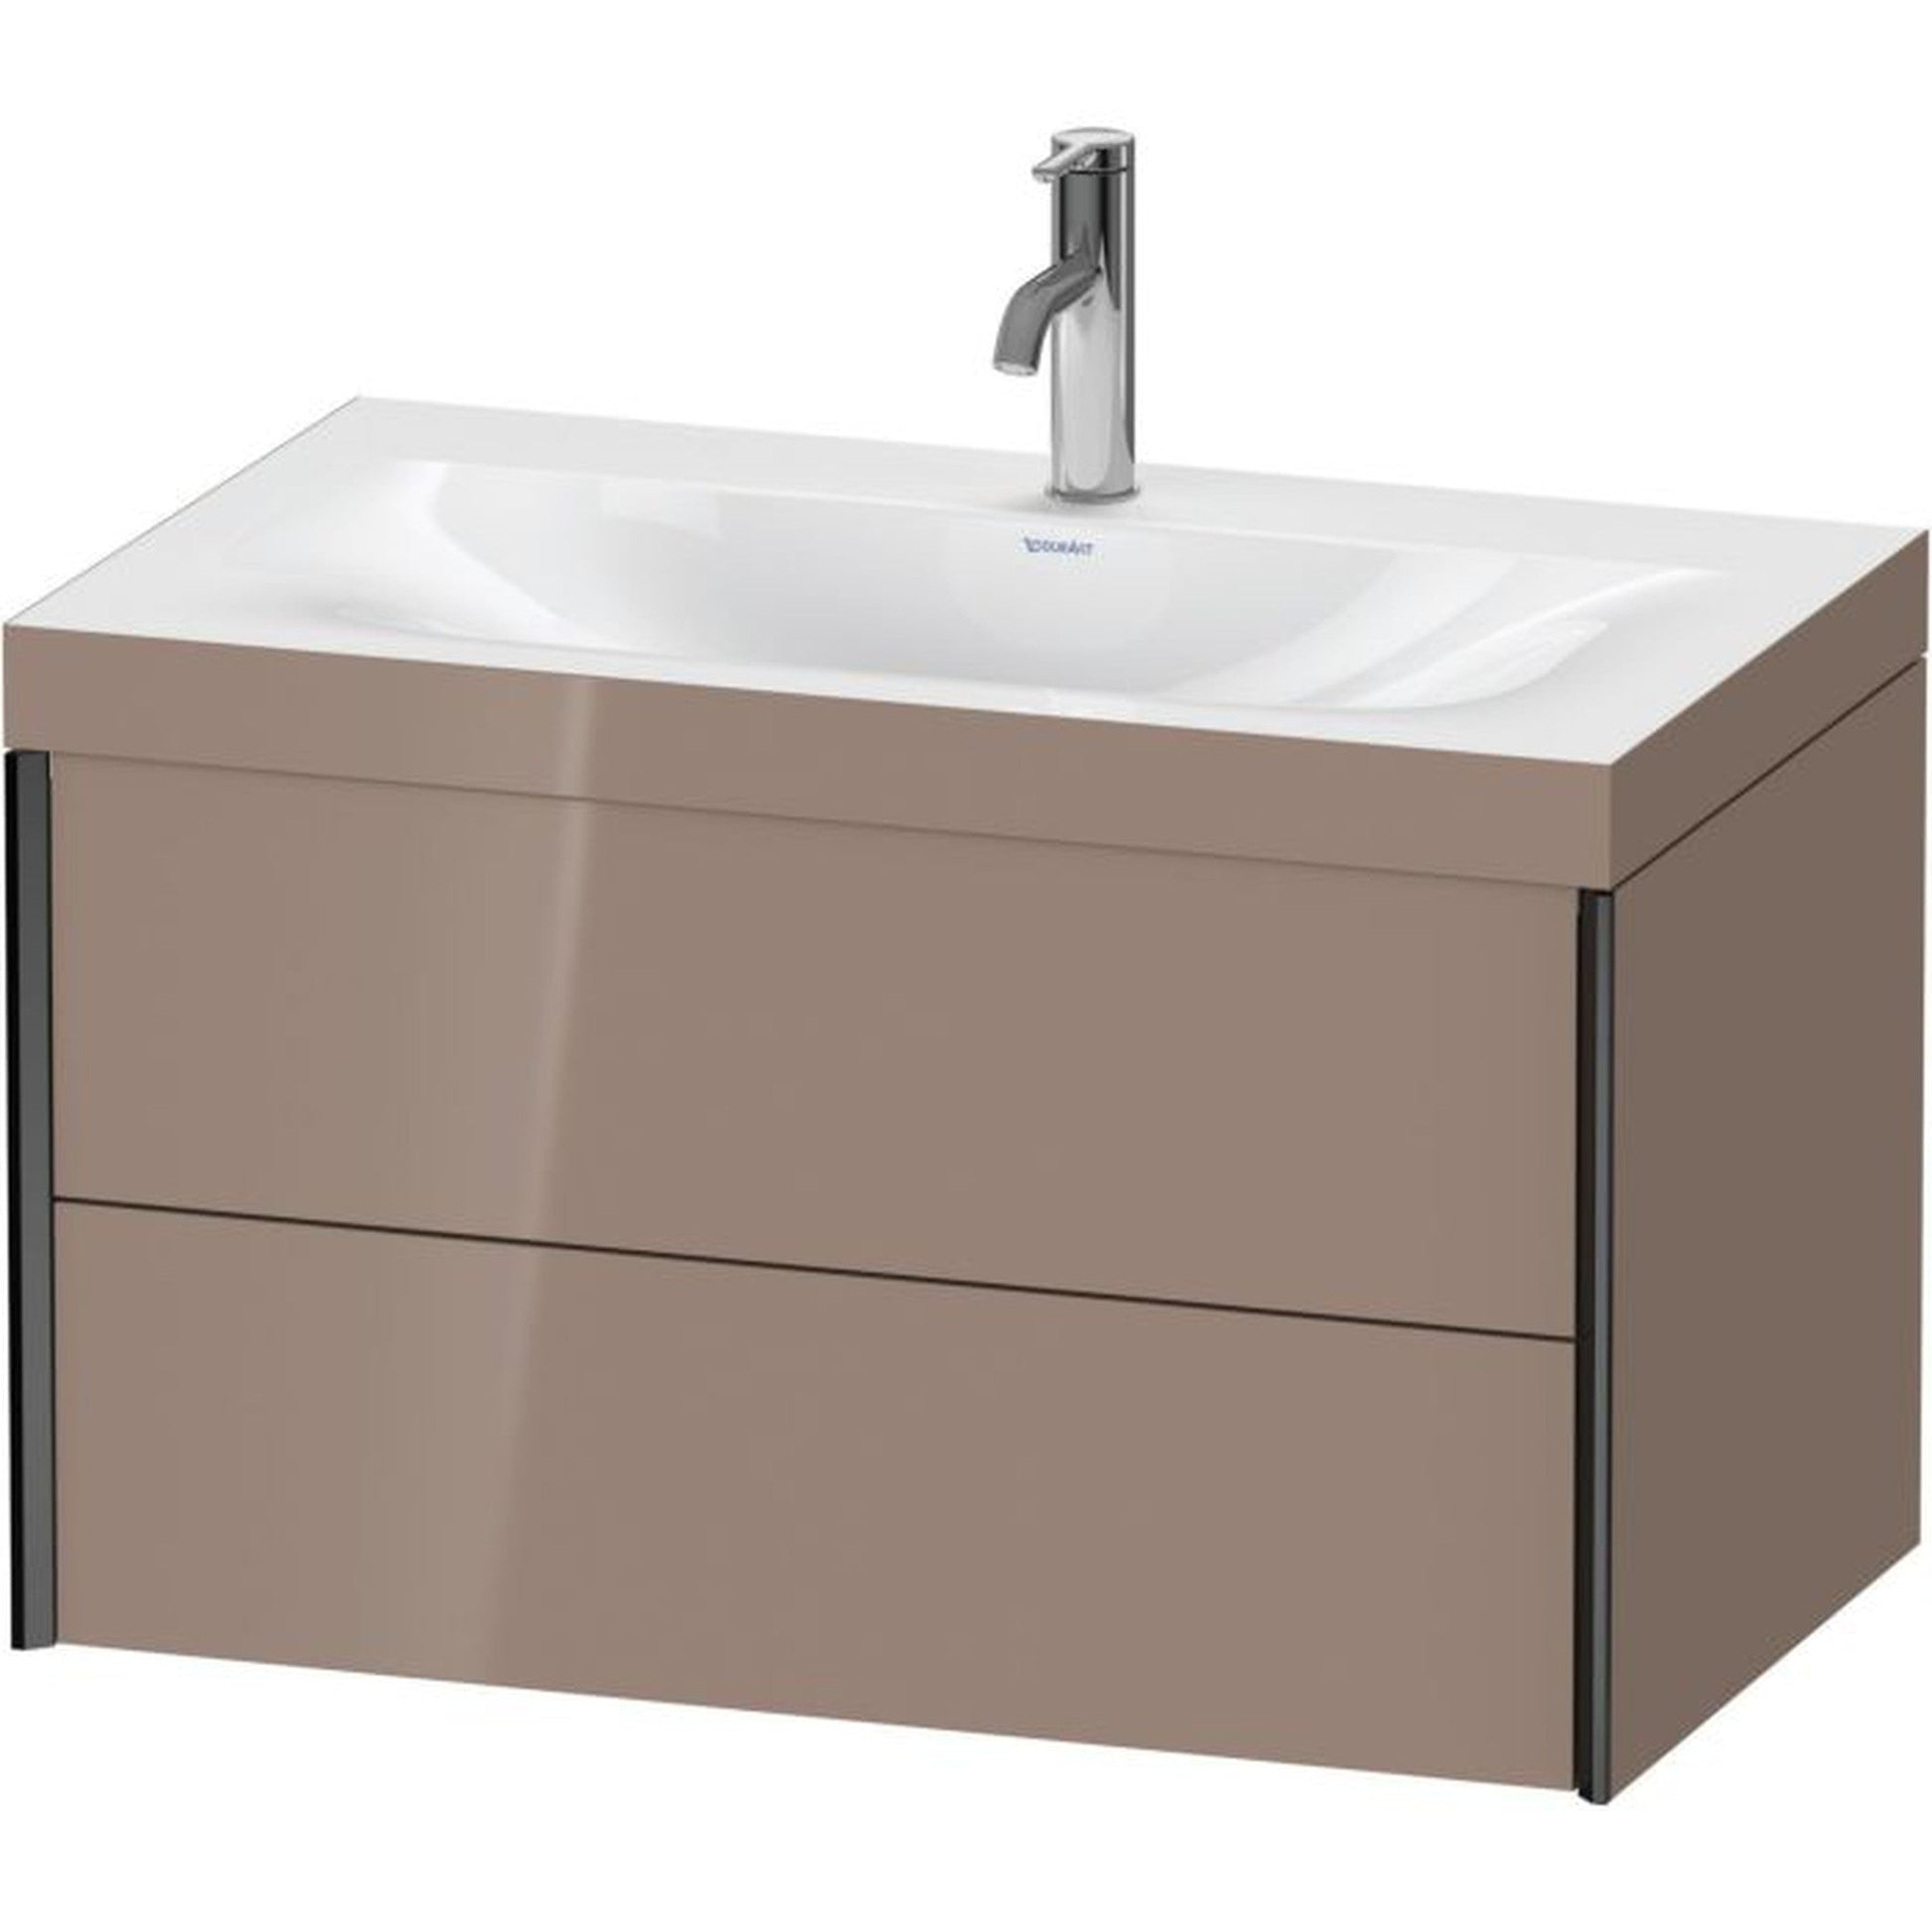 Duravit Xviu 31" x 20" x 19" Two Drawer C-Bonded Wall-Mount Vanity Kit With One Tap Hole, Cappuccino (XV4615OB286C)